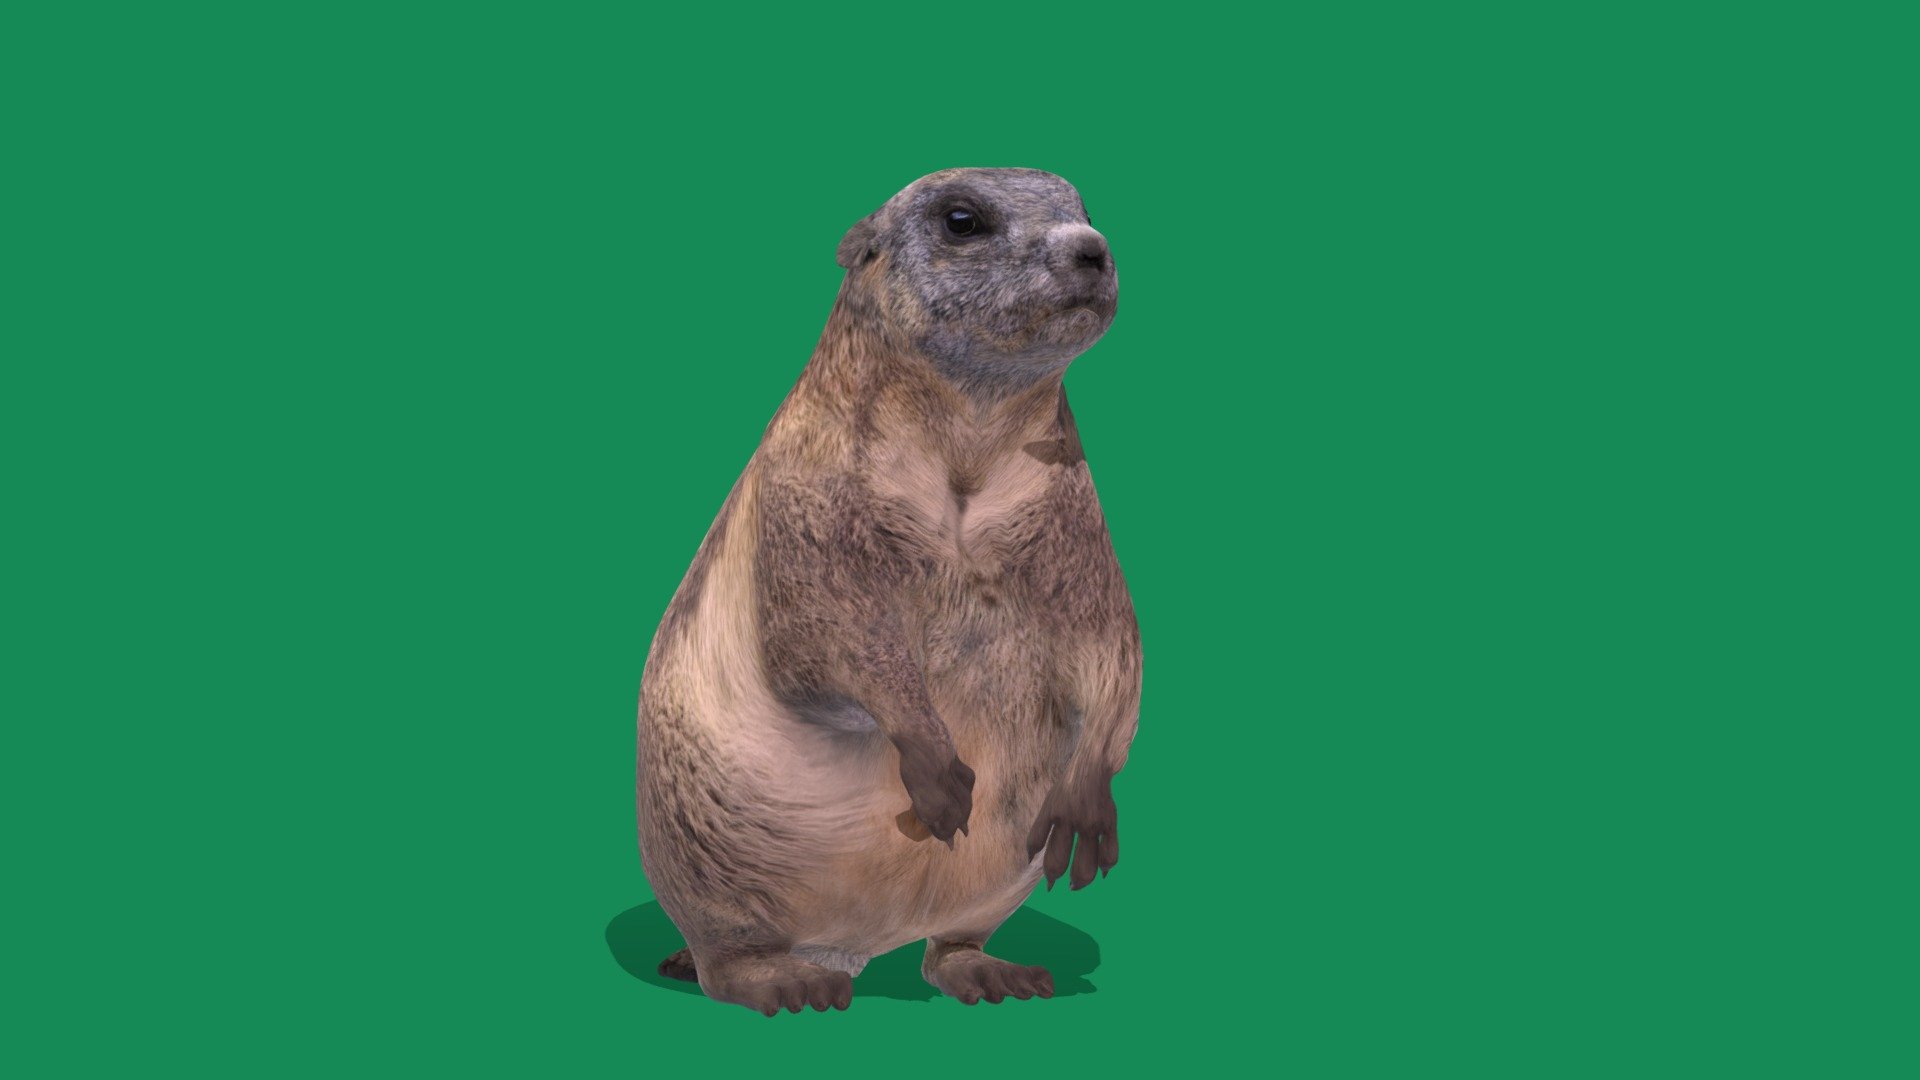 Groundhog(Woodchuck) North America,Sciuridae

Marmota monax Animal Rodent(Lowland Creature)Cute,Pet

1 Draw Calls

LowPoly

Game Ready(Asset)

Subdivision Surface Ready

Single-Animations 

4K PBR Textures 1 Material

Unreal/Unity FBX 

Blend File 3.6.5 LTS/4 Plus

USDZ File(AR Ready). Real Scale Dimension (Xcode ,Reality Composer, Keynote Ready)

Textures File


GLB/GlTF  (Unreal 5.1 Plus Native Support,Godot,Spark AR,Lens Studio,Effector,Spline,Play Canvas,Omniverse,GDevelop-5,BuildBox)




Triangles -26728



Faces -13364

Edges -26794

Vertices -13433

Diffuse,Metallic,Roughness,Normal Map,Specular Map,AO

The groundhog, as the woodchuck,is a rodent of the family Sciuridae, to the group of large ground squirrels  as marmots.The groundhog is a lowland creature of North America;found through much of the Eastern United States, across Canada, into Alaska.Groundhogs are known for their hibernation habits, which inspired the American tradition of Groundhog Day 3d model